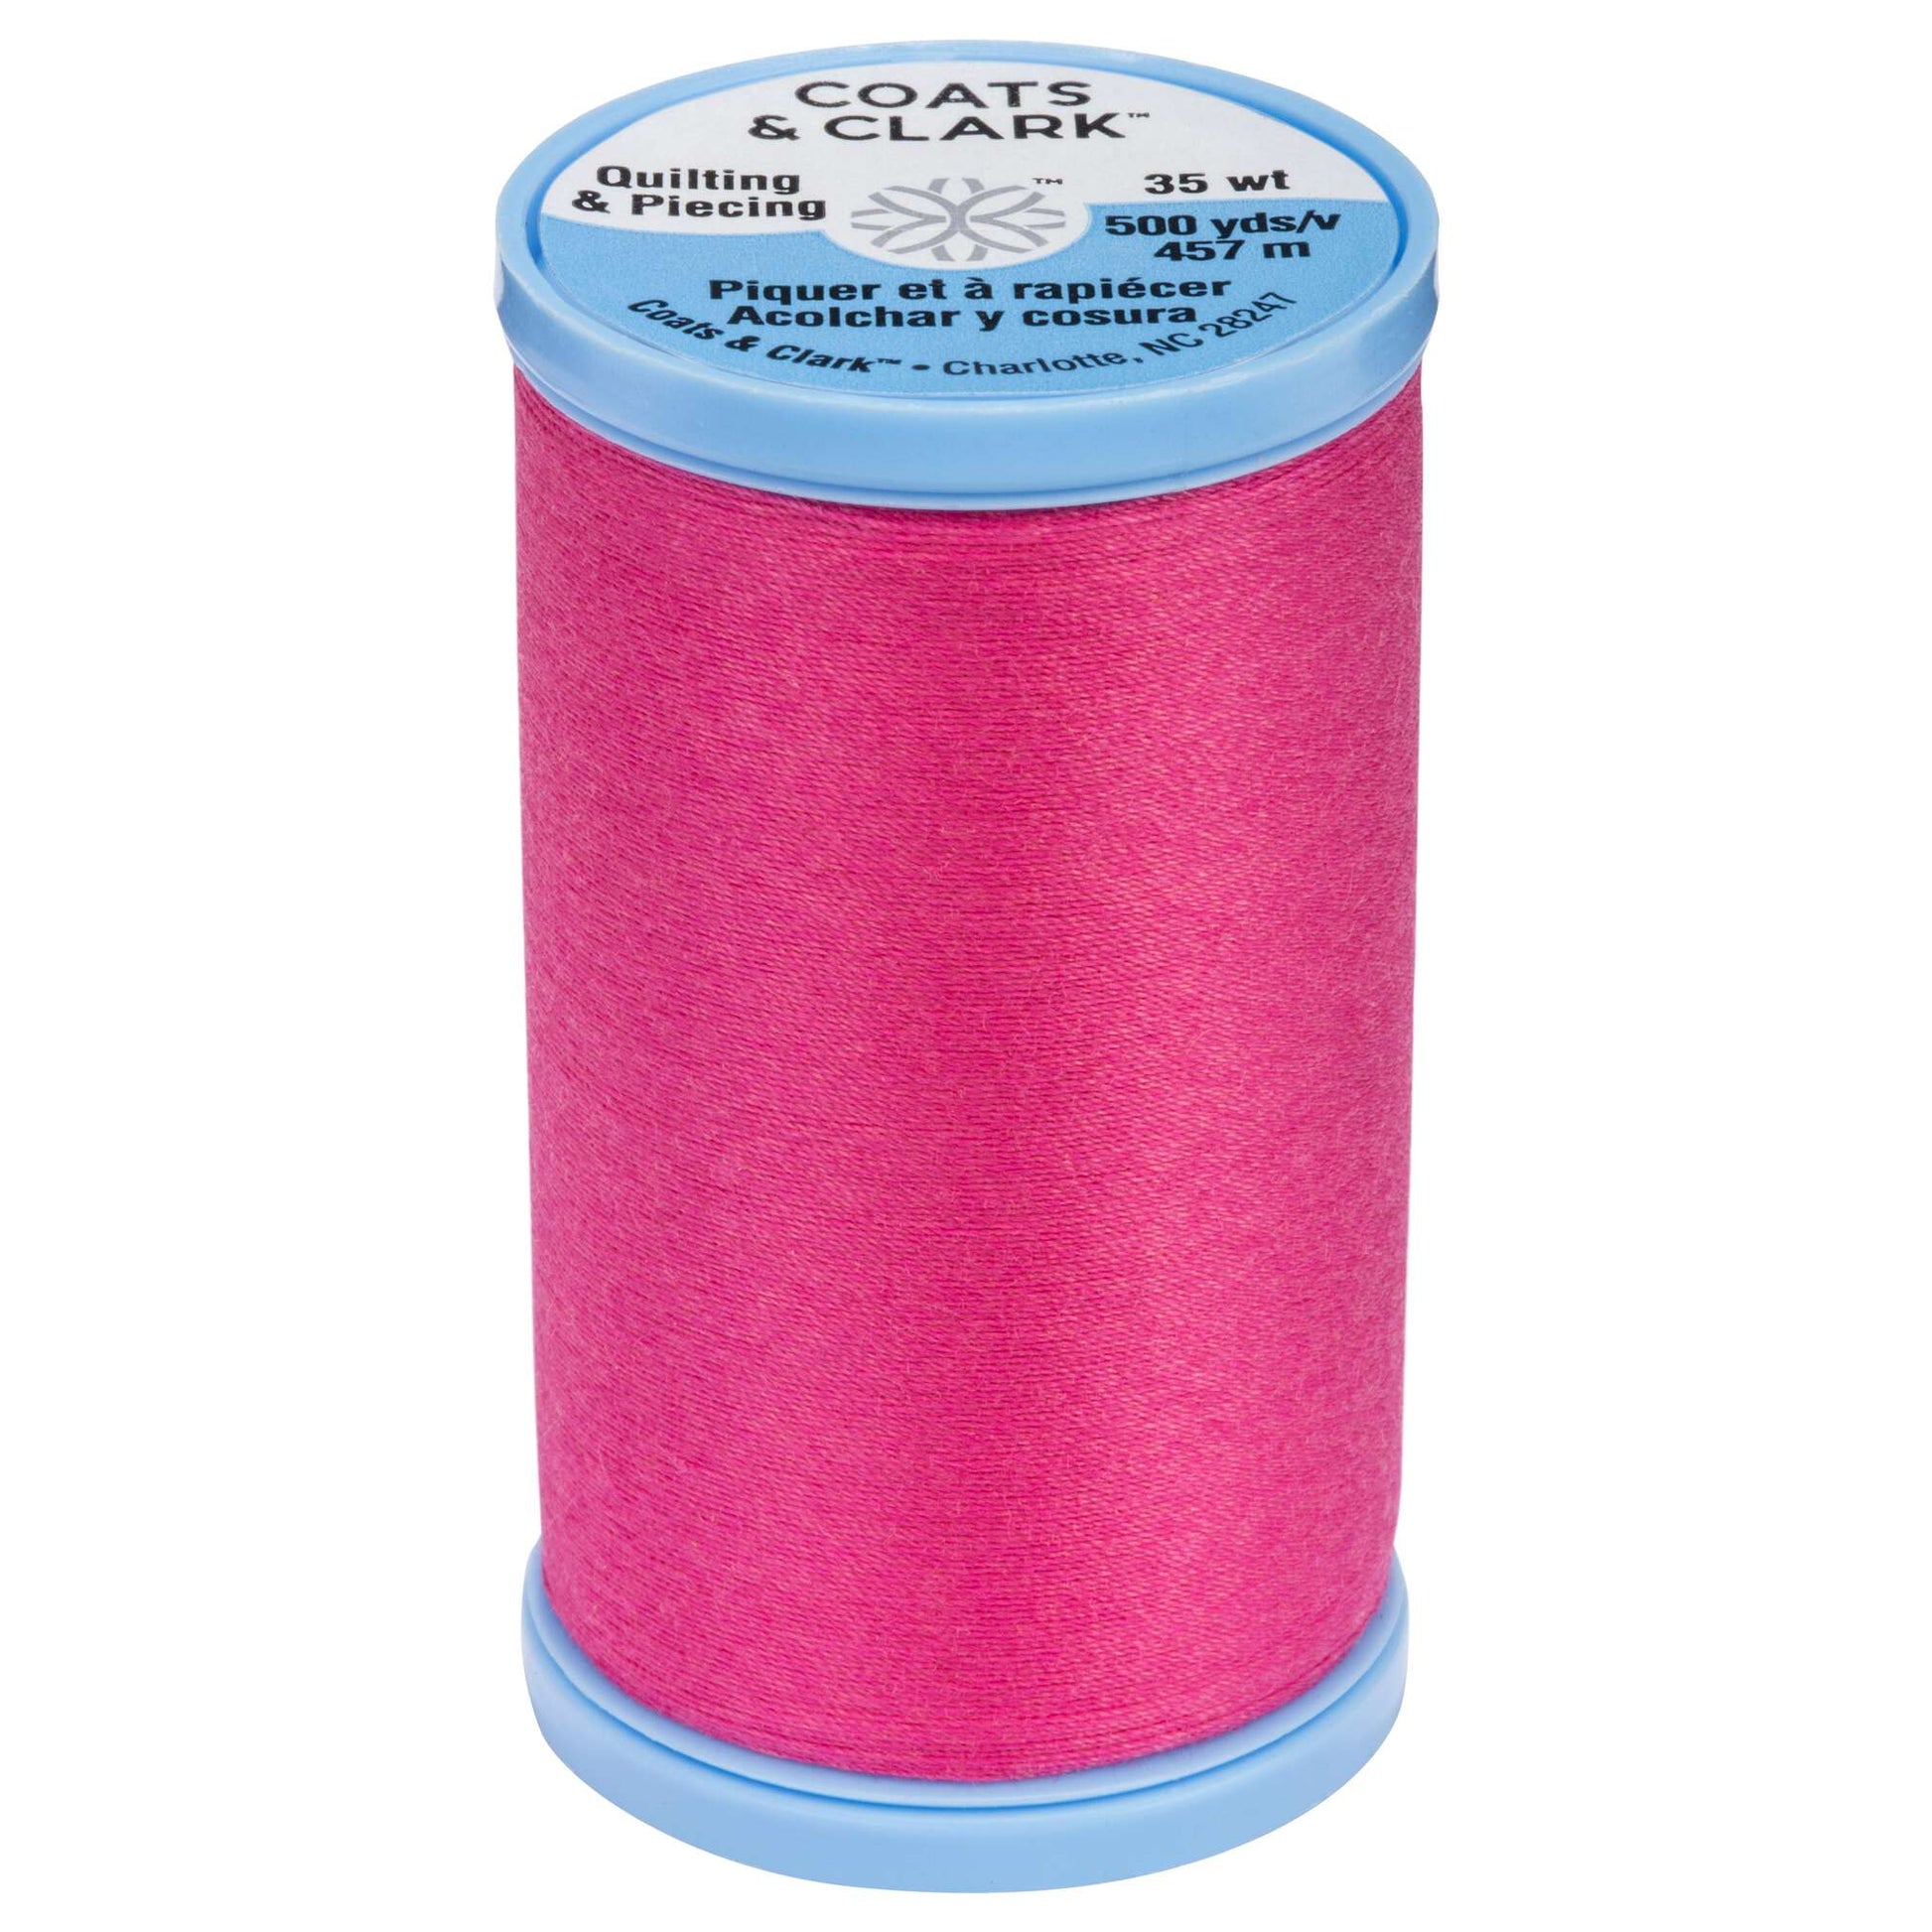 Coats & Clark Cotton Covered Quilting & Piecing Thread (500 Yards) Hot Pink